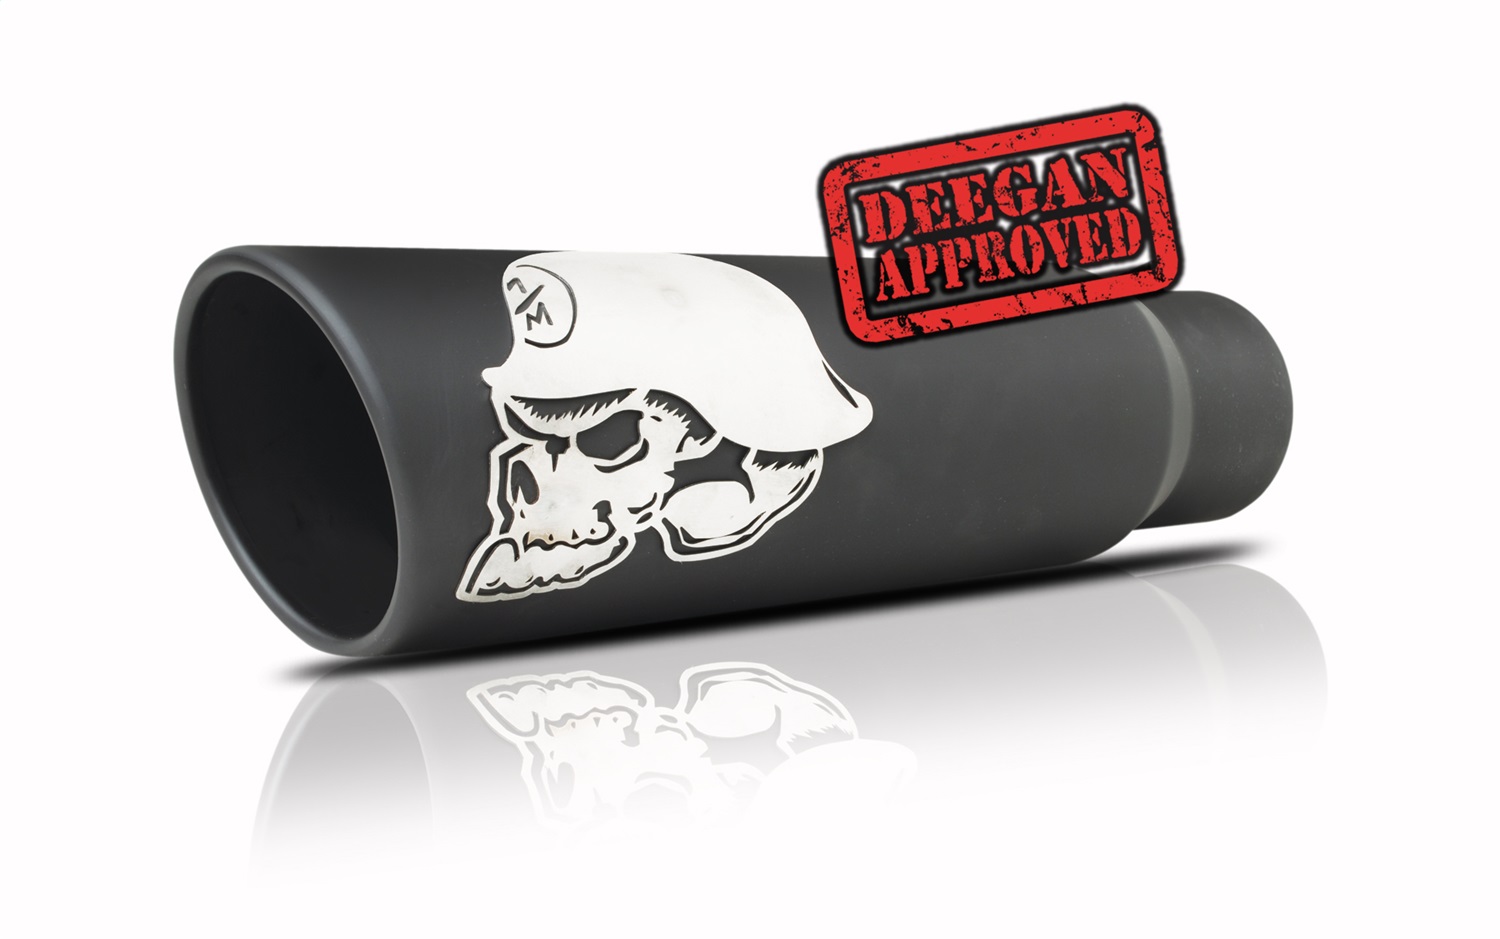 Gibson Performance 61-1046 Metal Mulisha Exhaust Tip Metal Mulisha Exhaust Tip; 5 in. Black Ceramic Round Rolled Edge Slash-Cut Tip; 2.25 in. / 2.5 in. Inlet; 5 in. Outlet; L-12 in.;